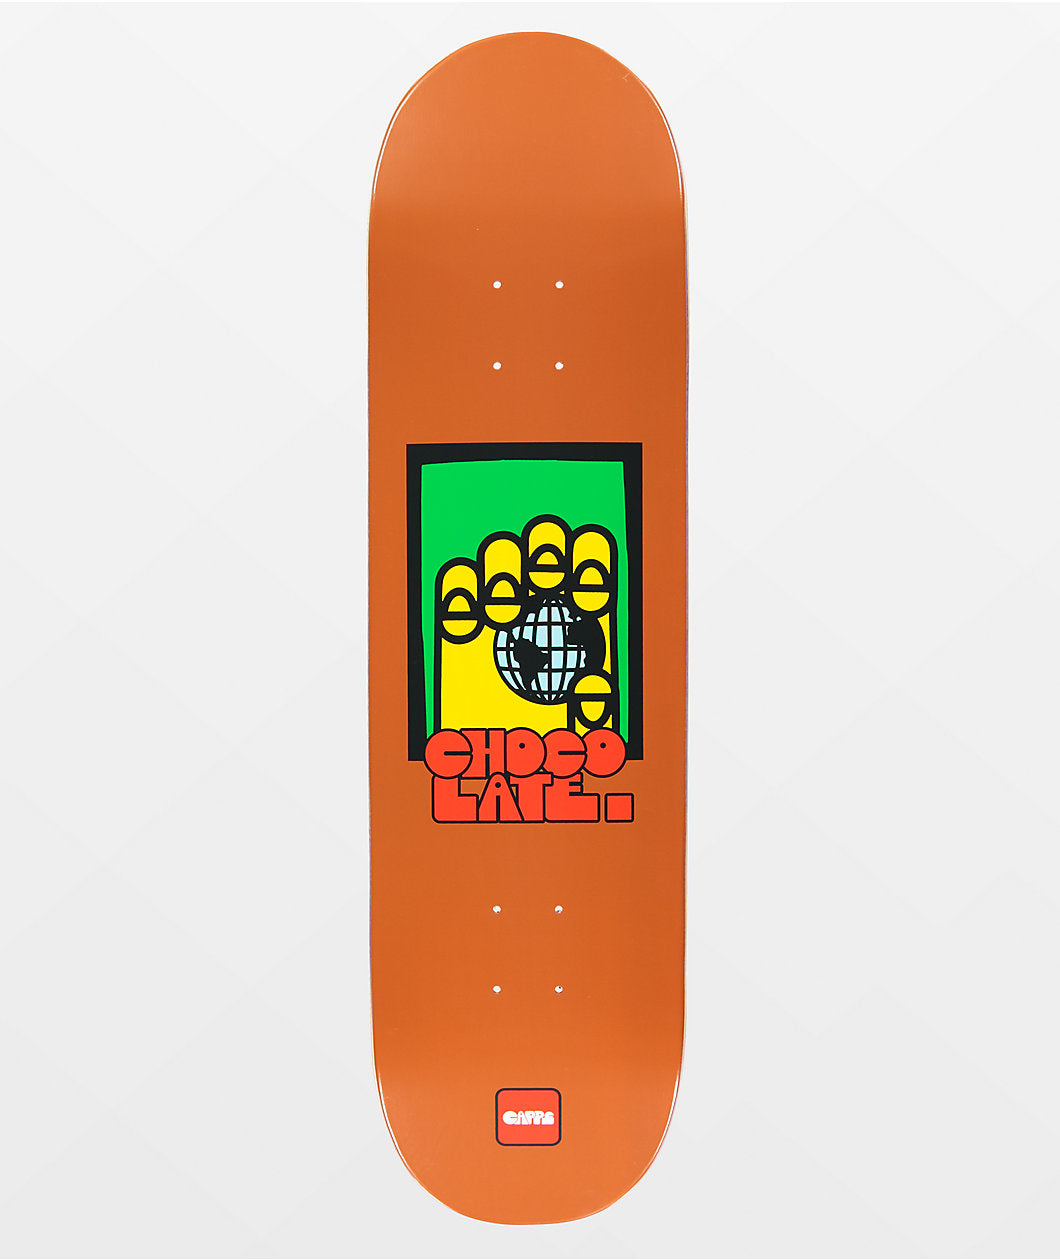 Chocolate Capps Worldwide Deck size 8.0